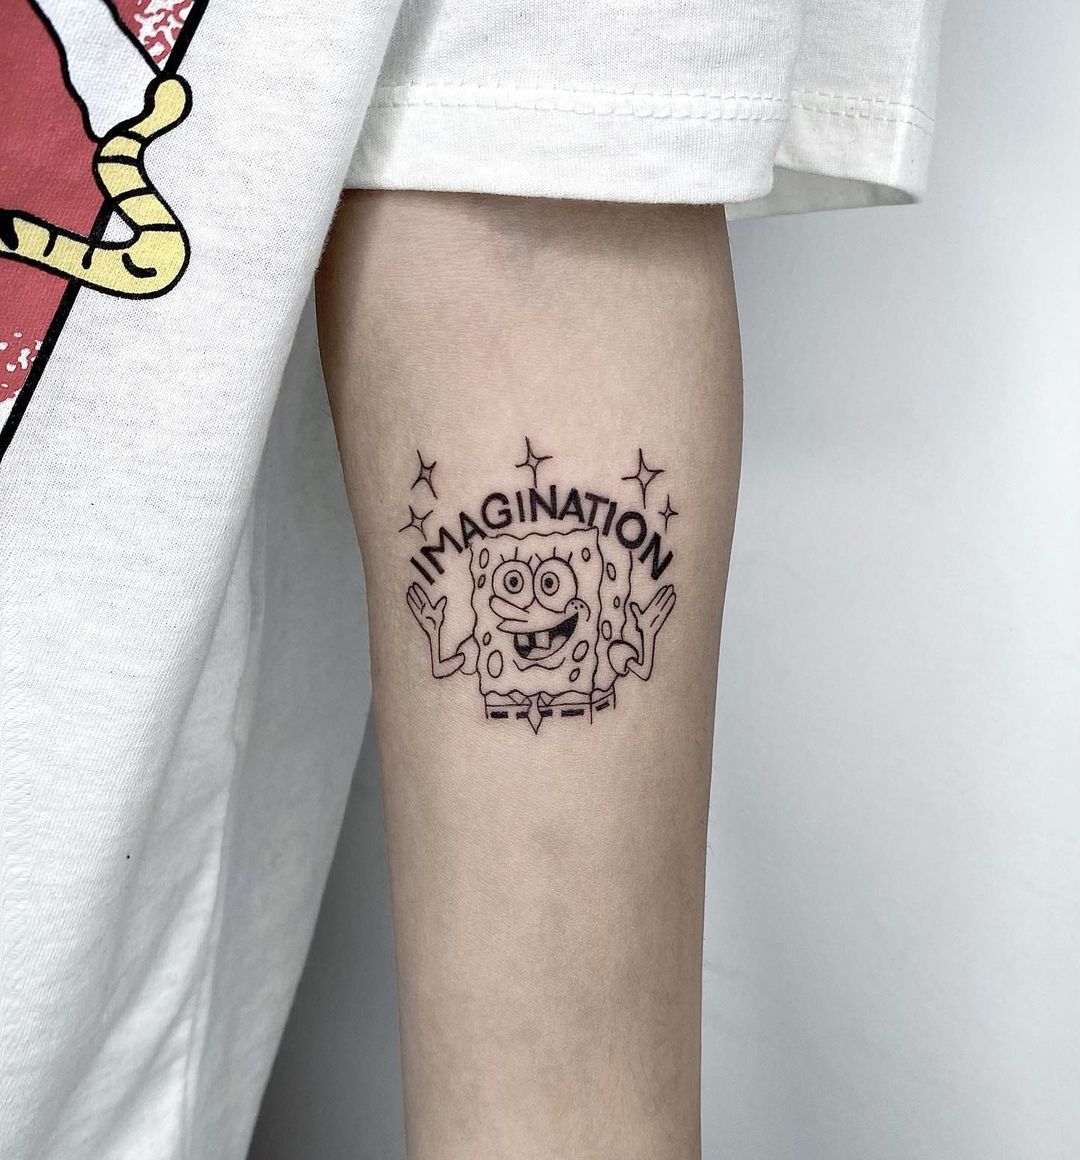 Spongebob Squarepants Tattoos That Fans Have Our Respect For Actually  Getting Inked On Them